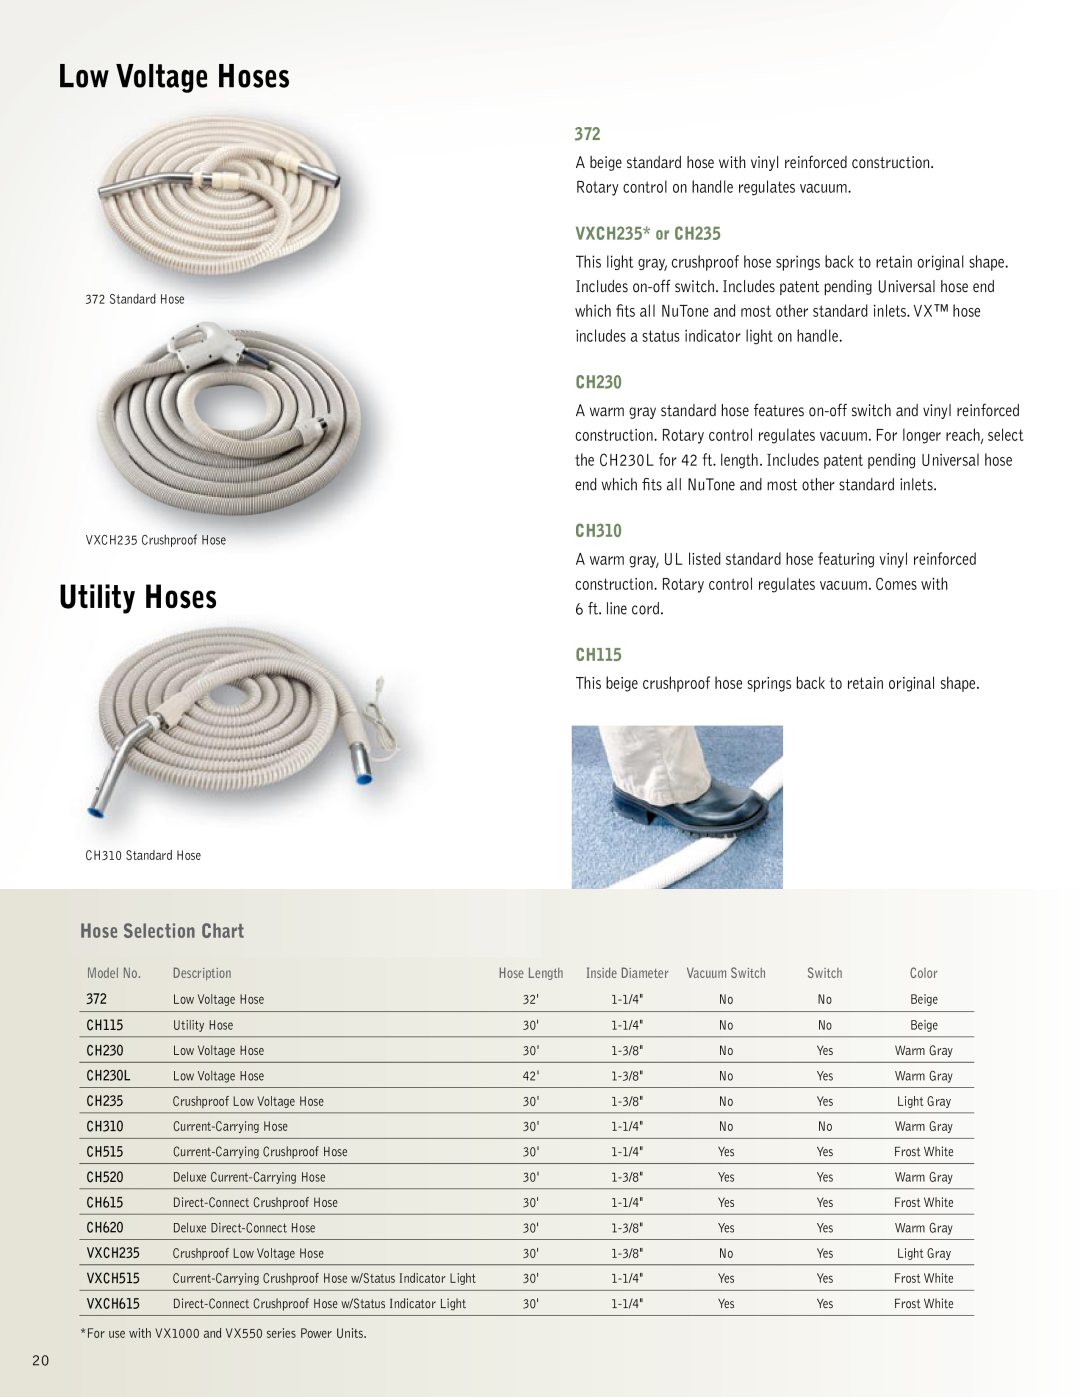 NuTone CH620 Low Voltage Hoses, Utility Hoses, Hose Selection Chart, VXCH235* or CH235, CH230, CH310, CH115, Model No 